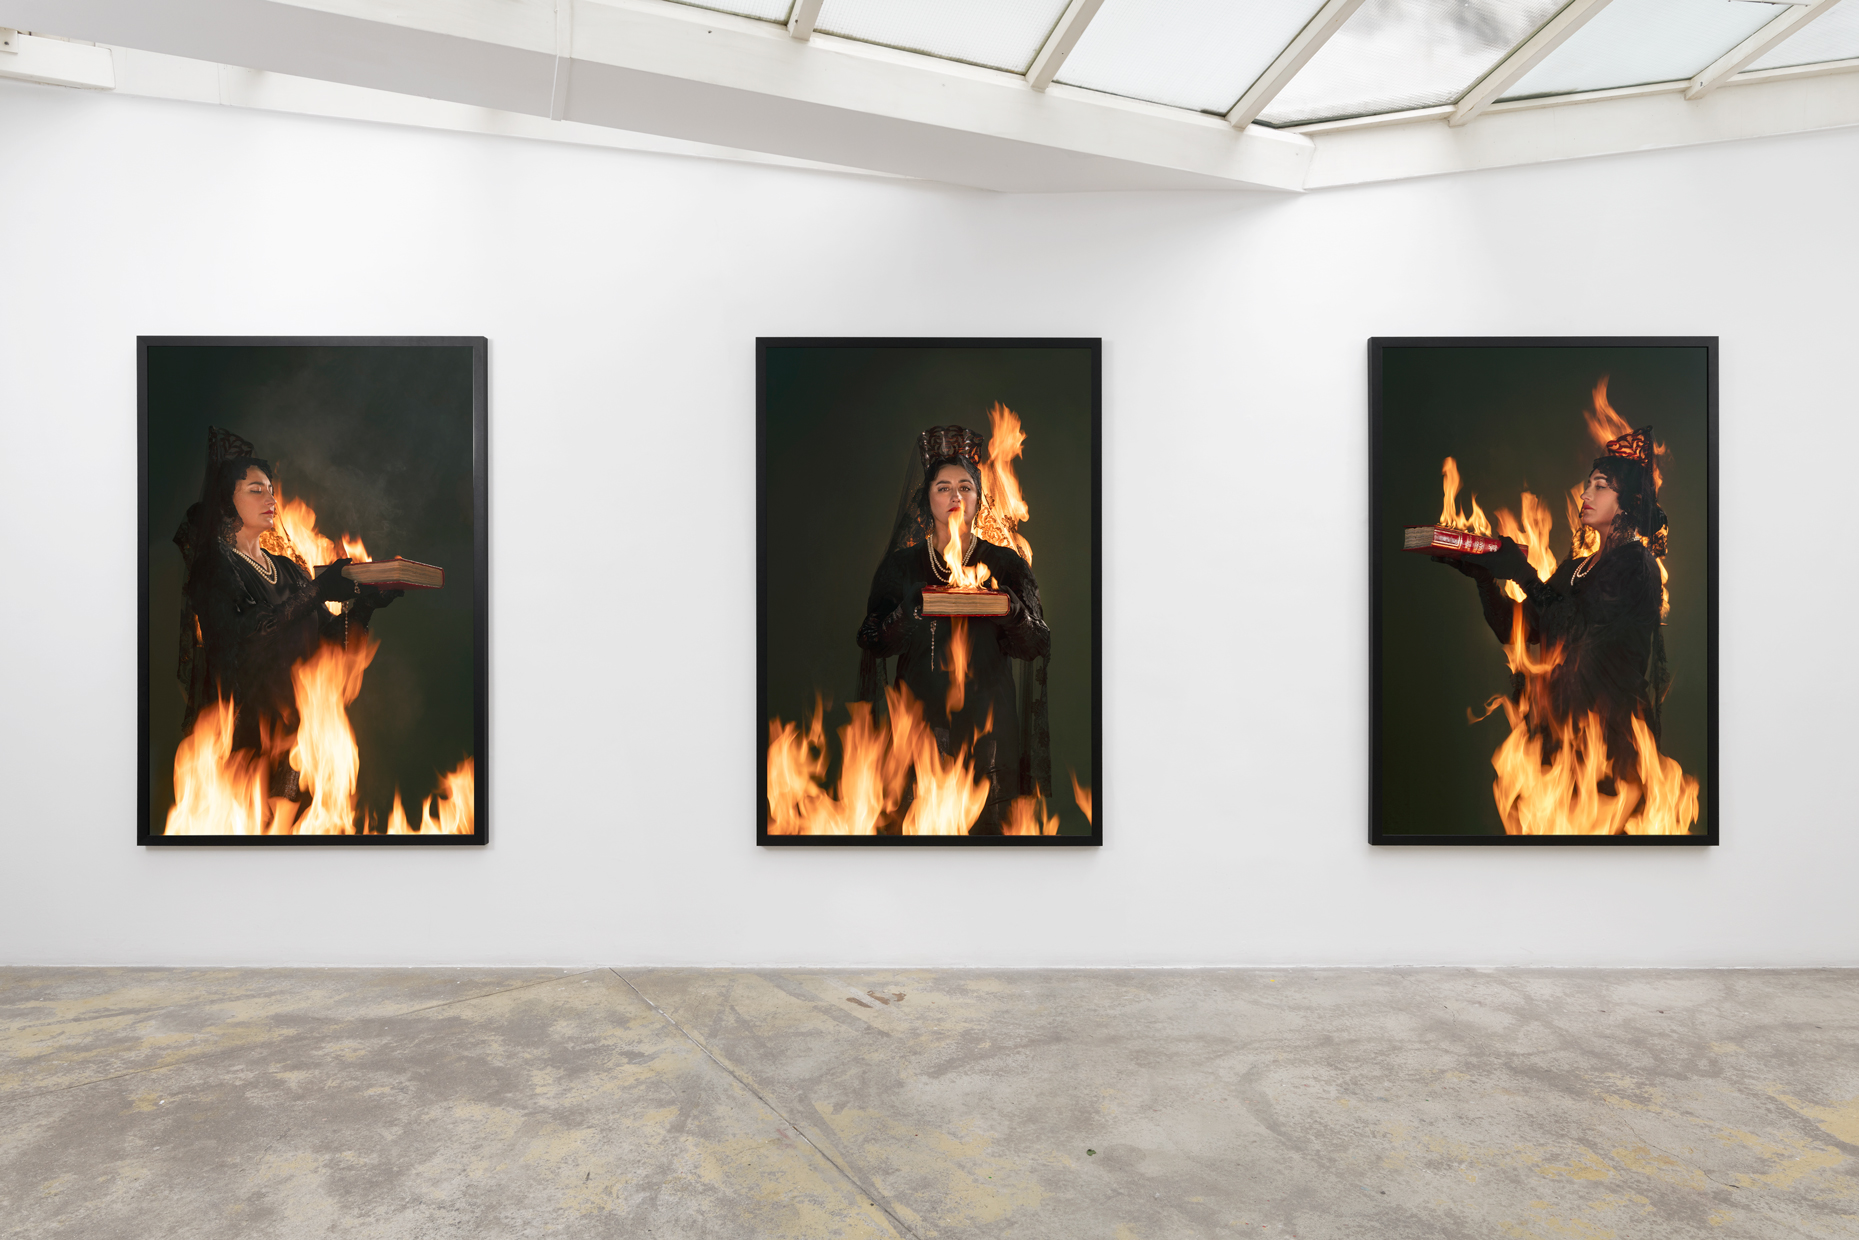 “No apagues mi fuego, déjame arder” - Galerie Georges-Philippe & Nathalie Vallois